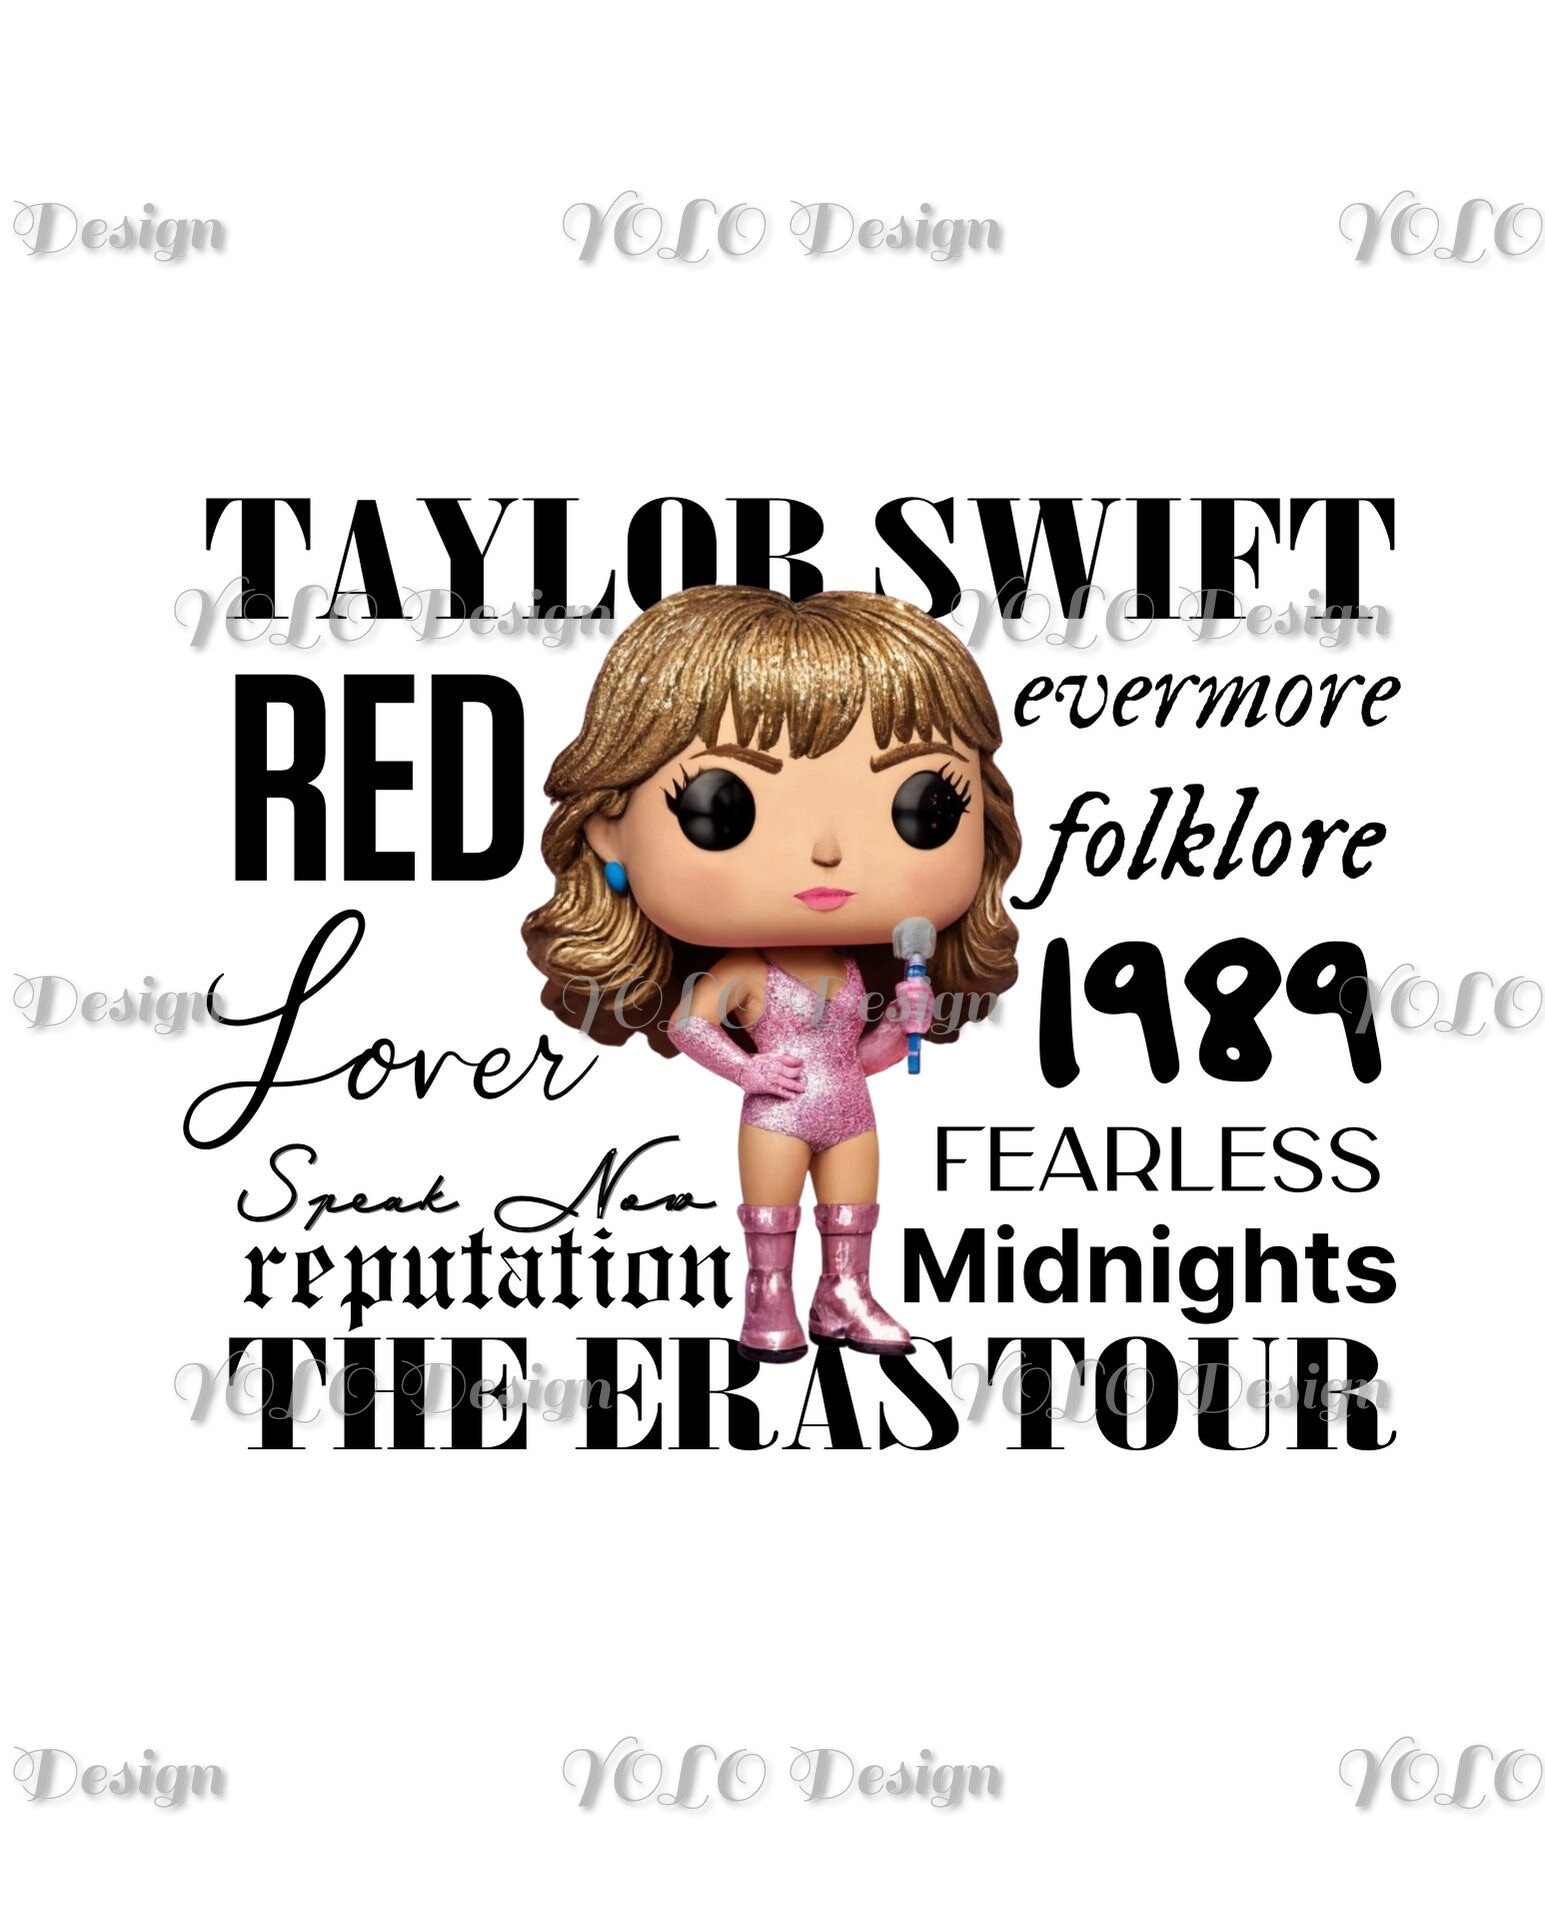 Taylor Swift Funko Pop Red Tour 